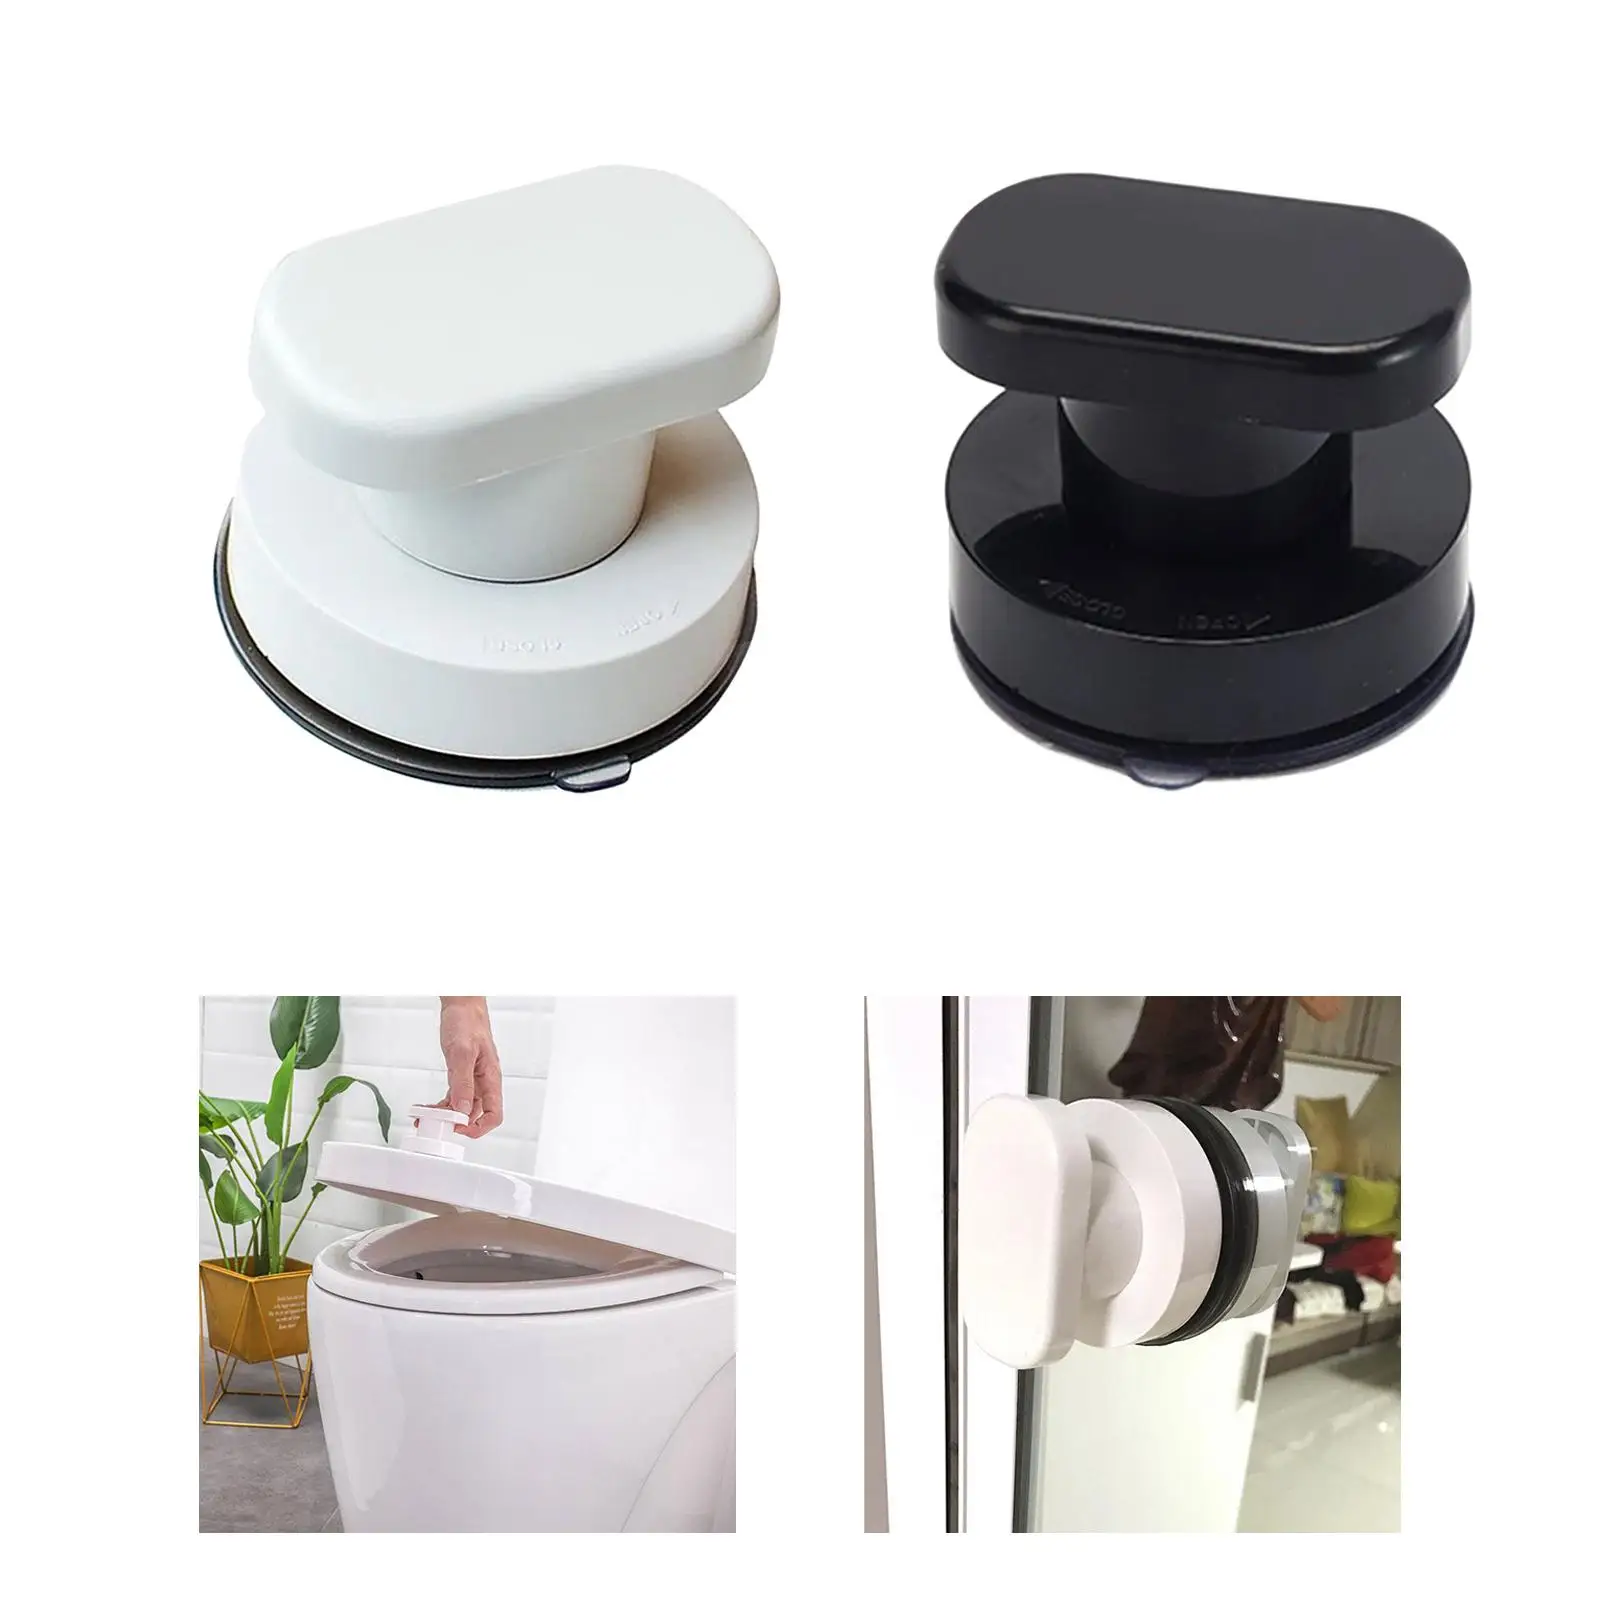 Anti Slip Suction Cup Handle Safety Handle Cabinet Pulls Toilet Bathroom Sliding Door Handle for Wardrobes Cabinets Window